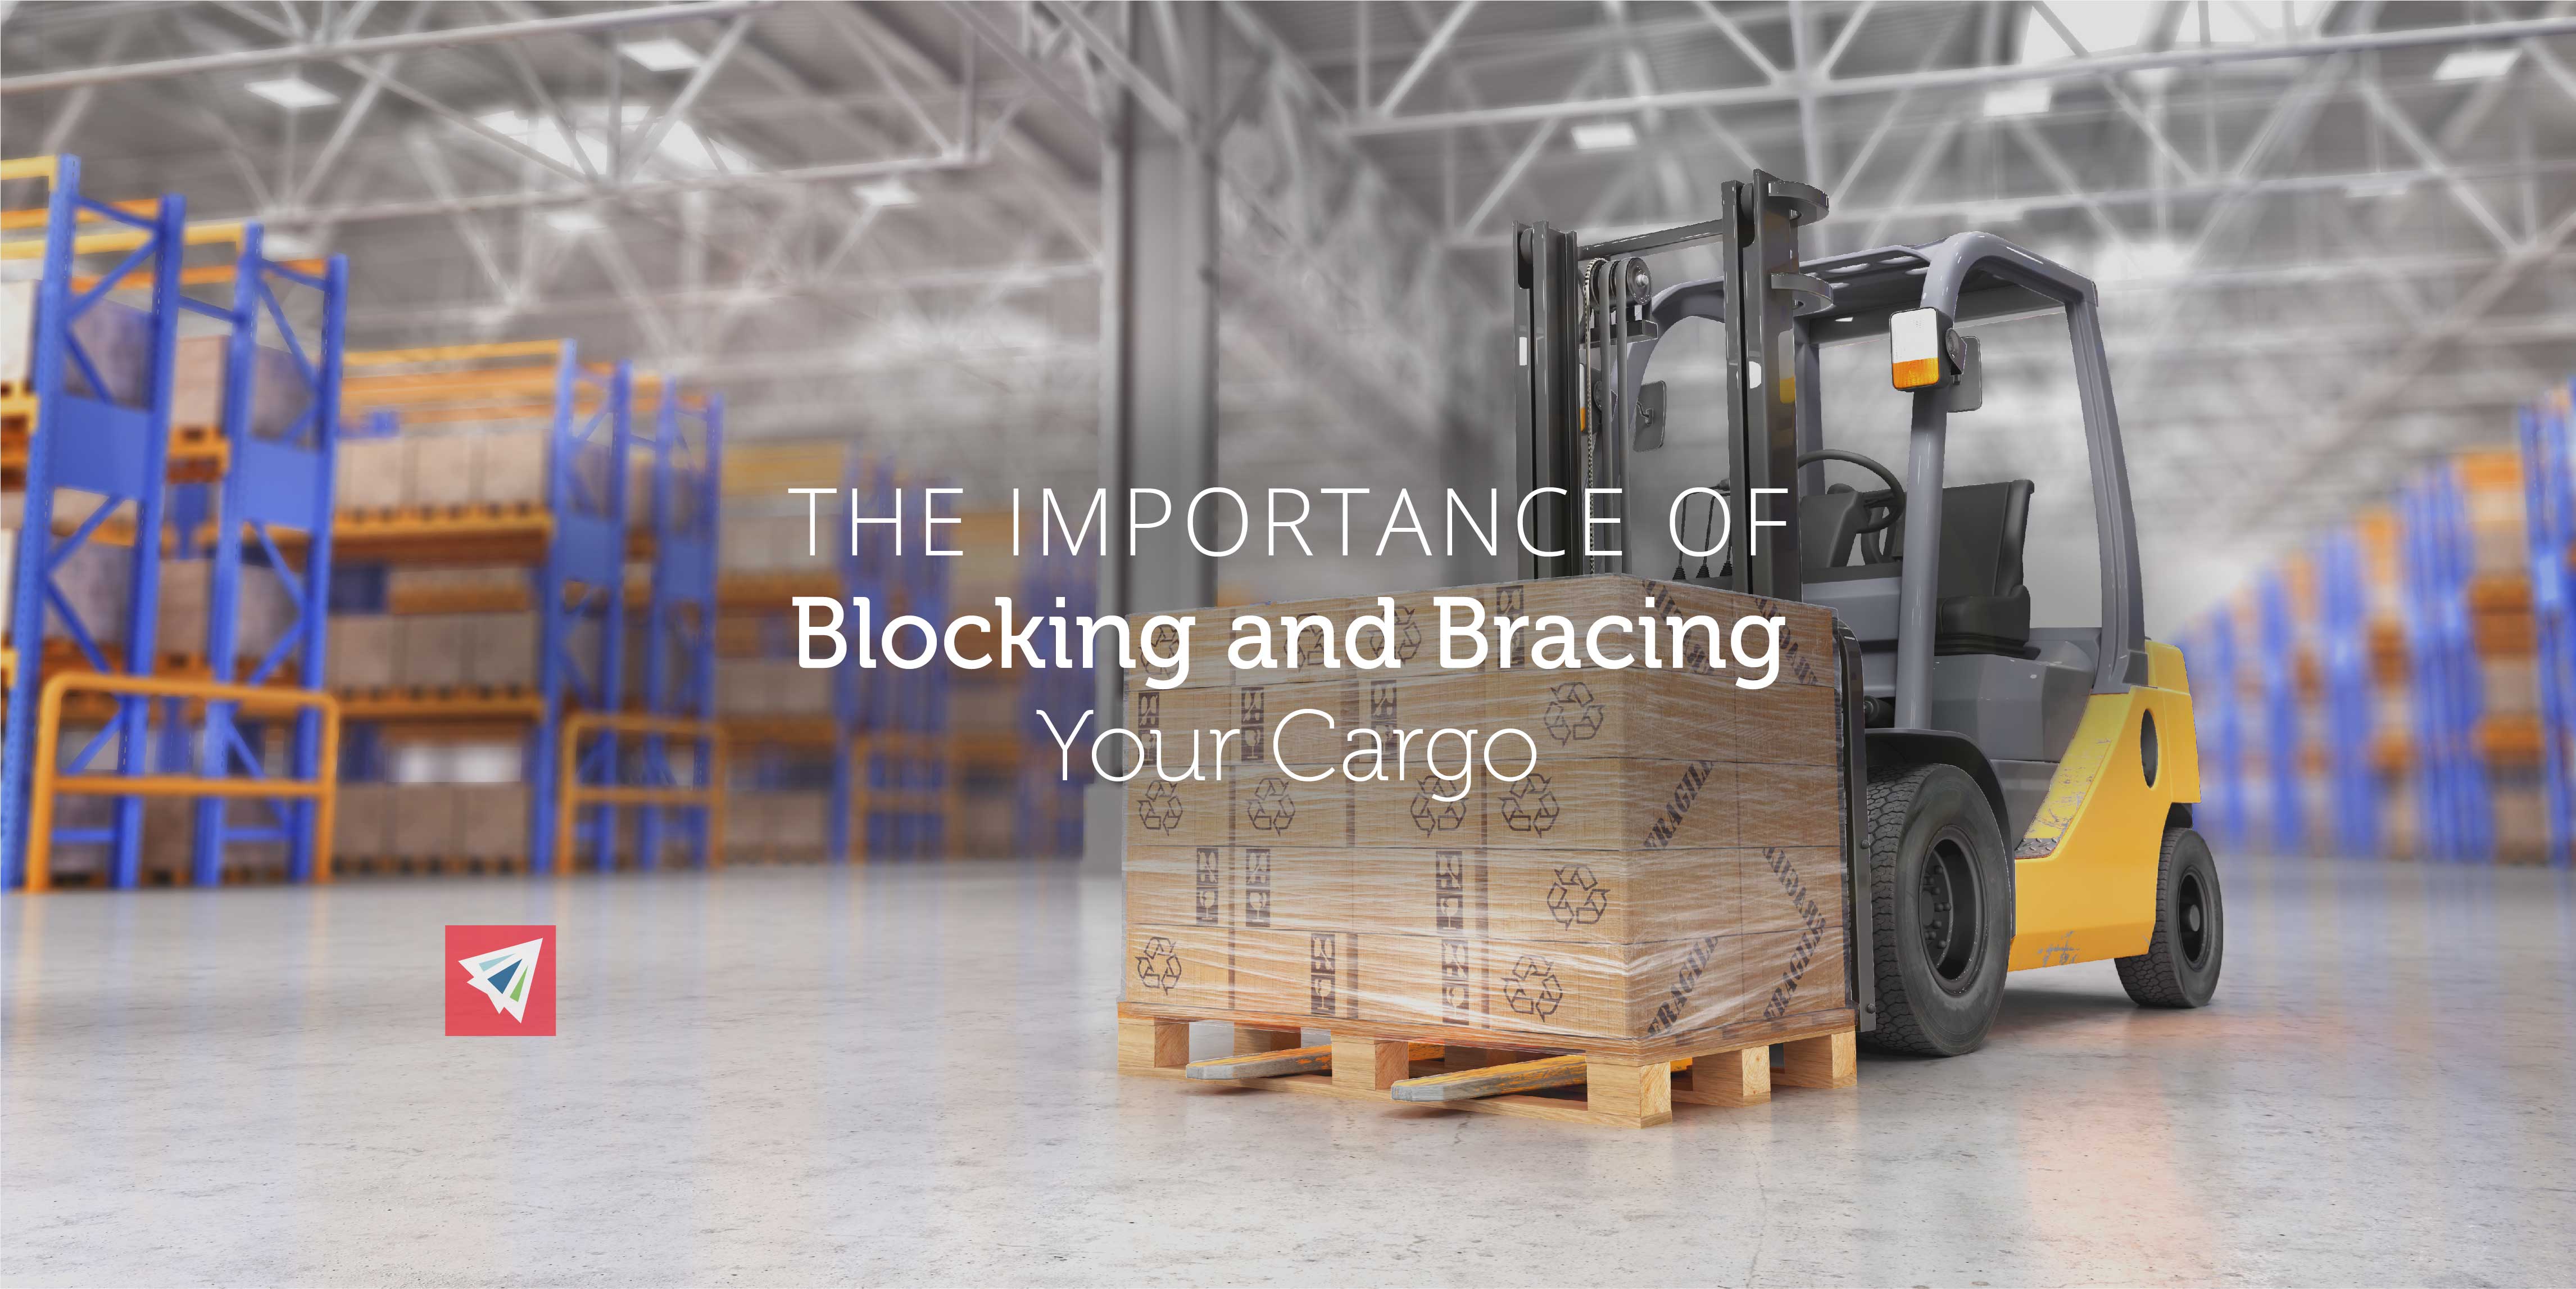 The Importance of Blocking and Bracing Your Cargo